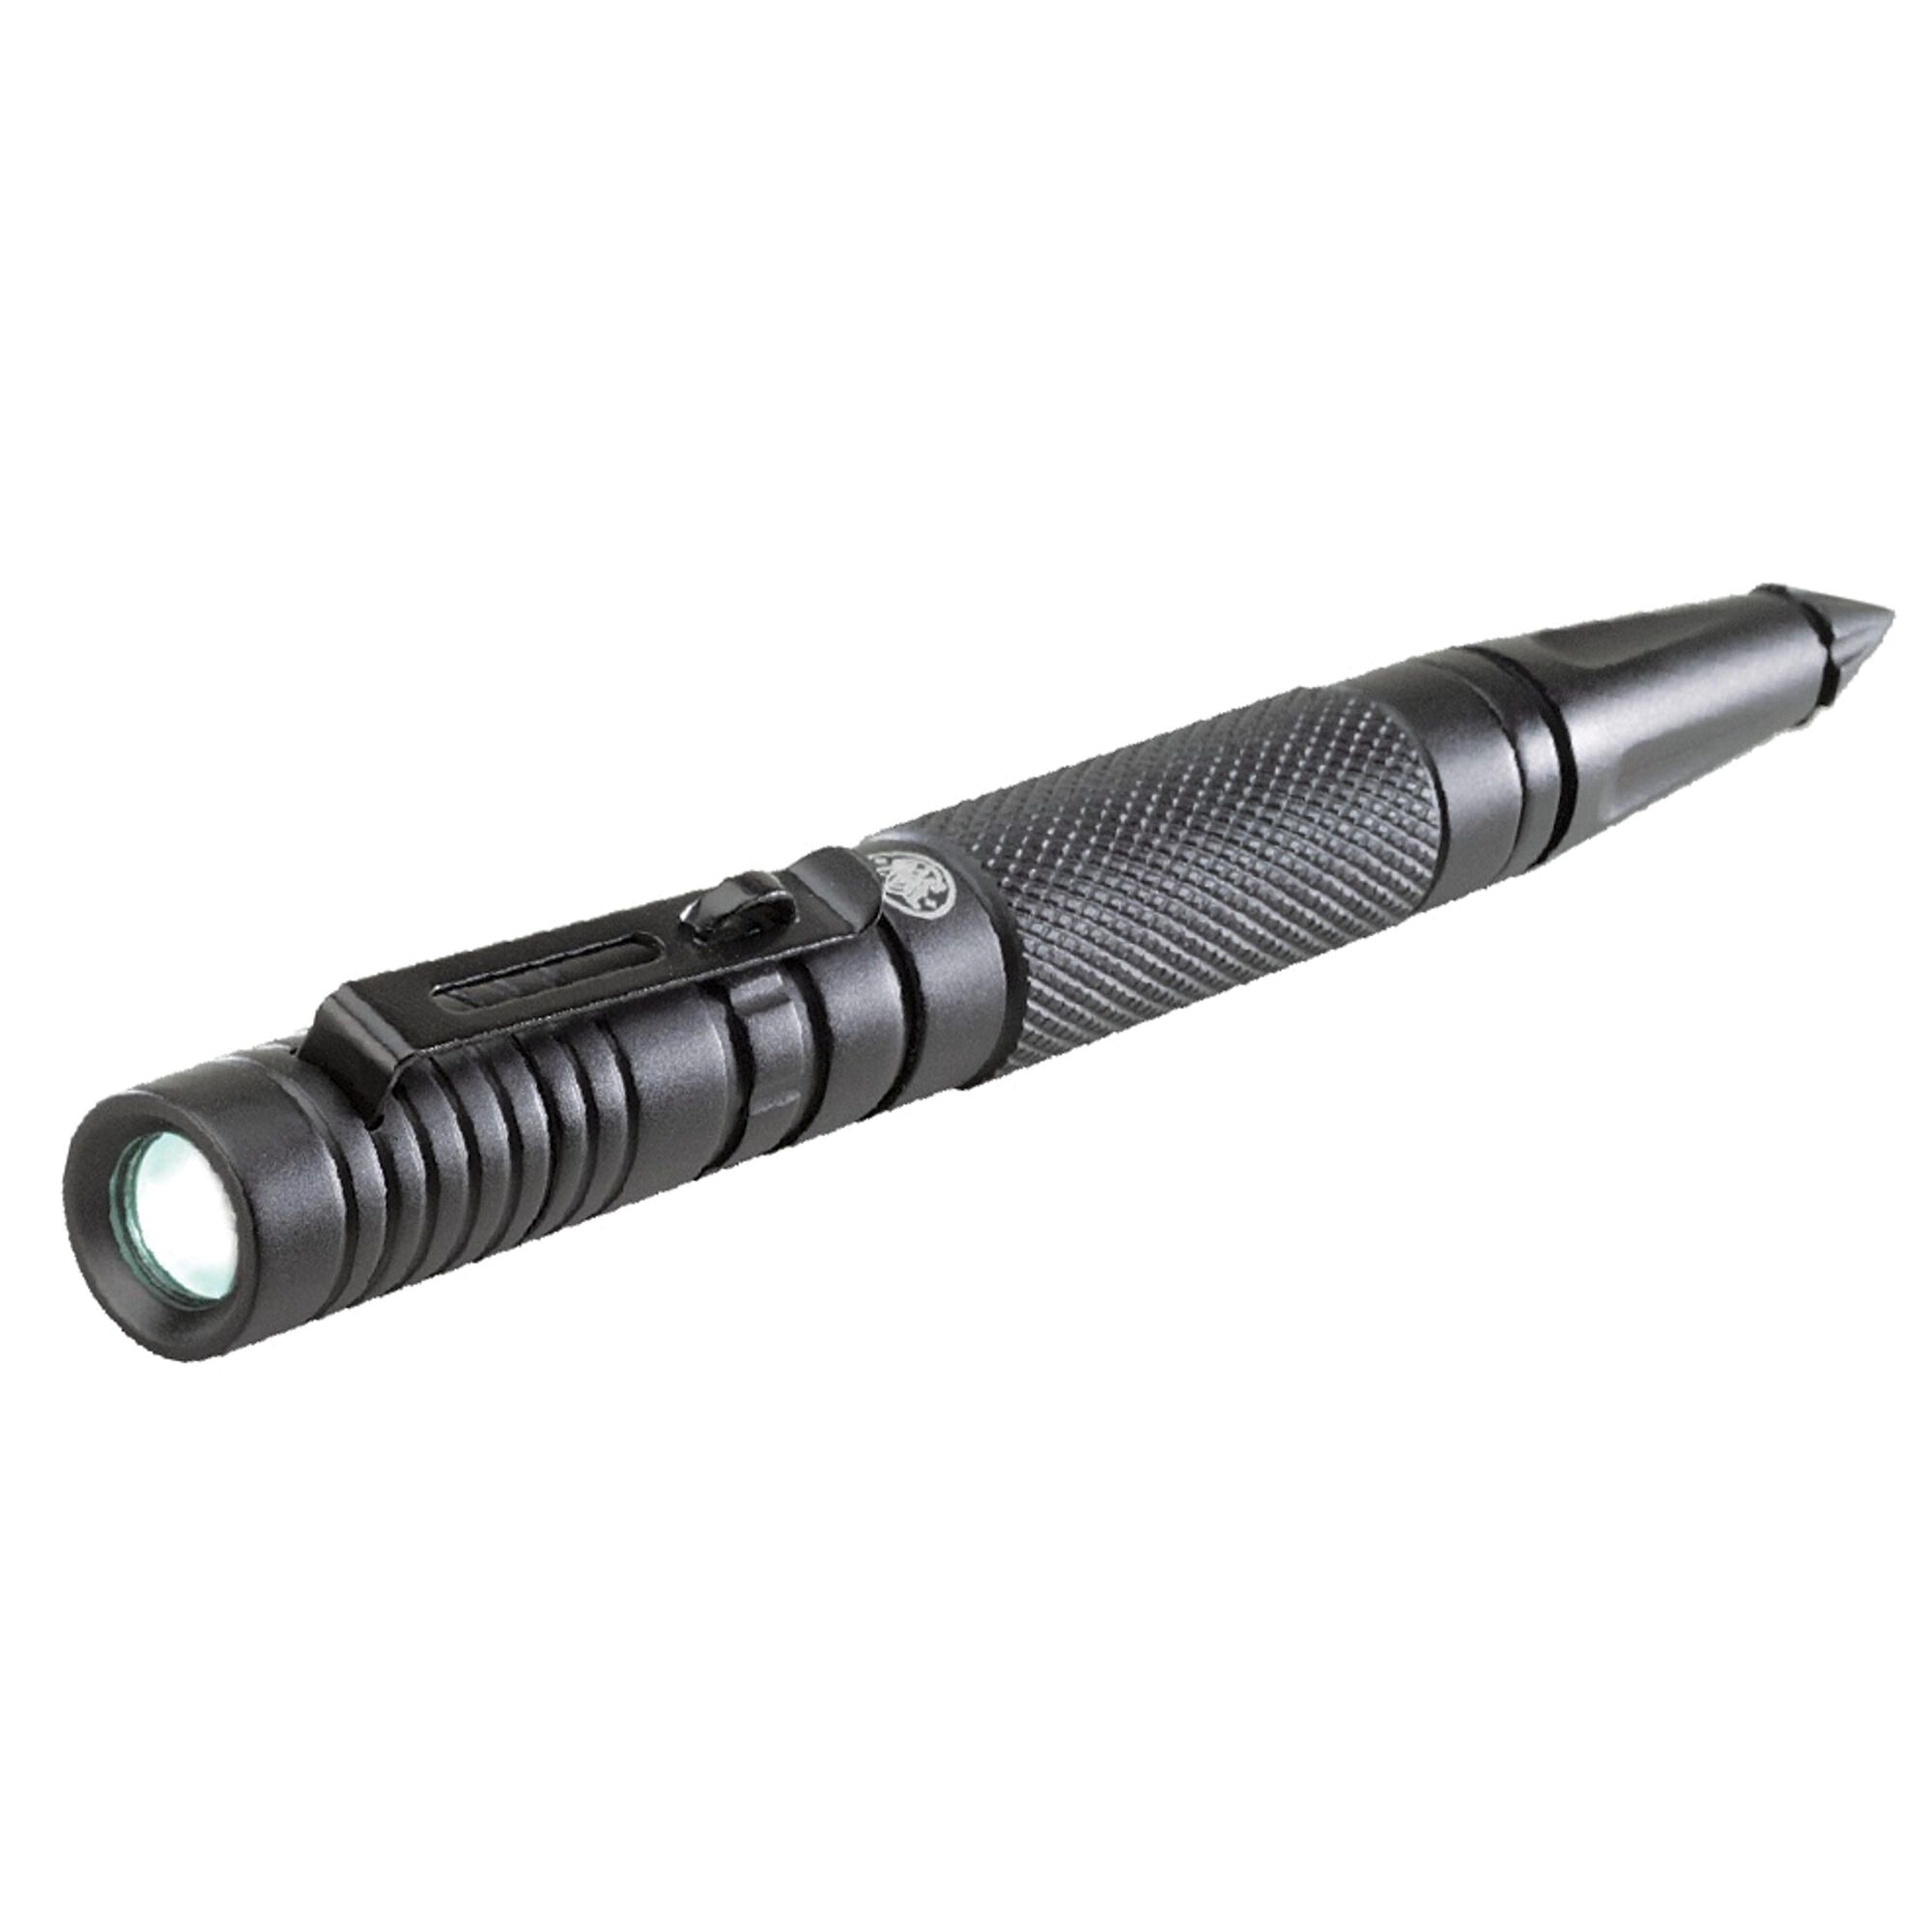 UZI Tactical Pen with Glass Breaker Tip and LED Flashlight in